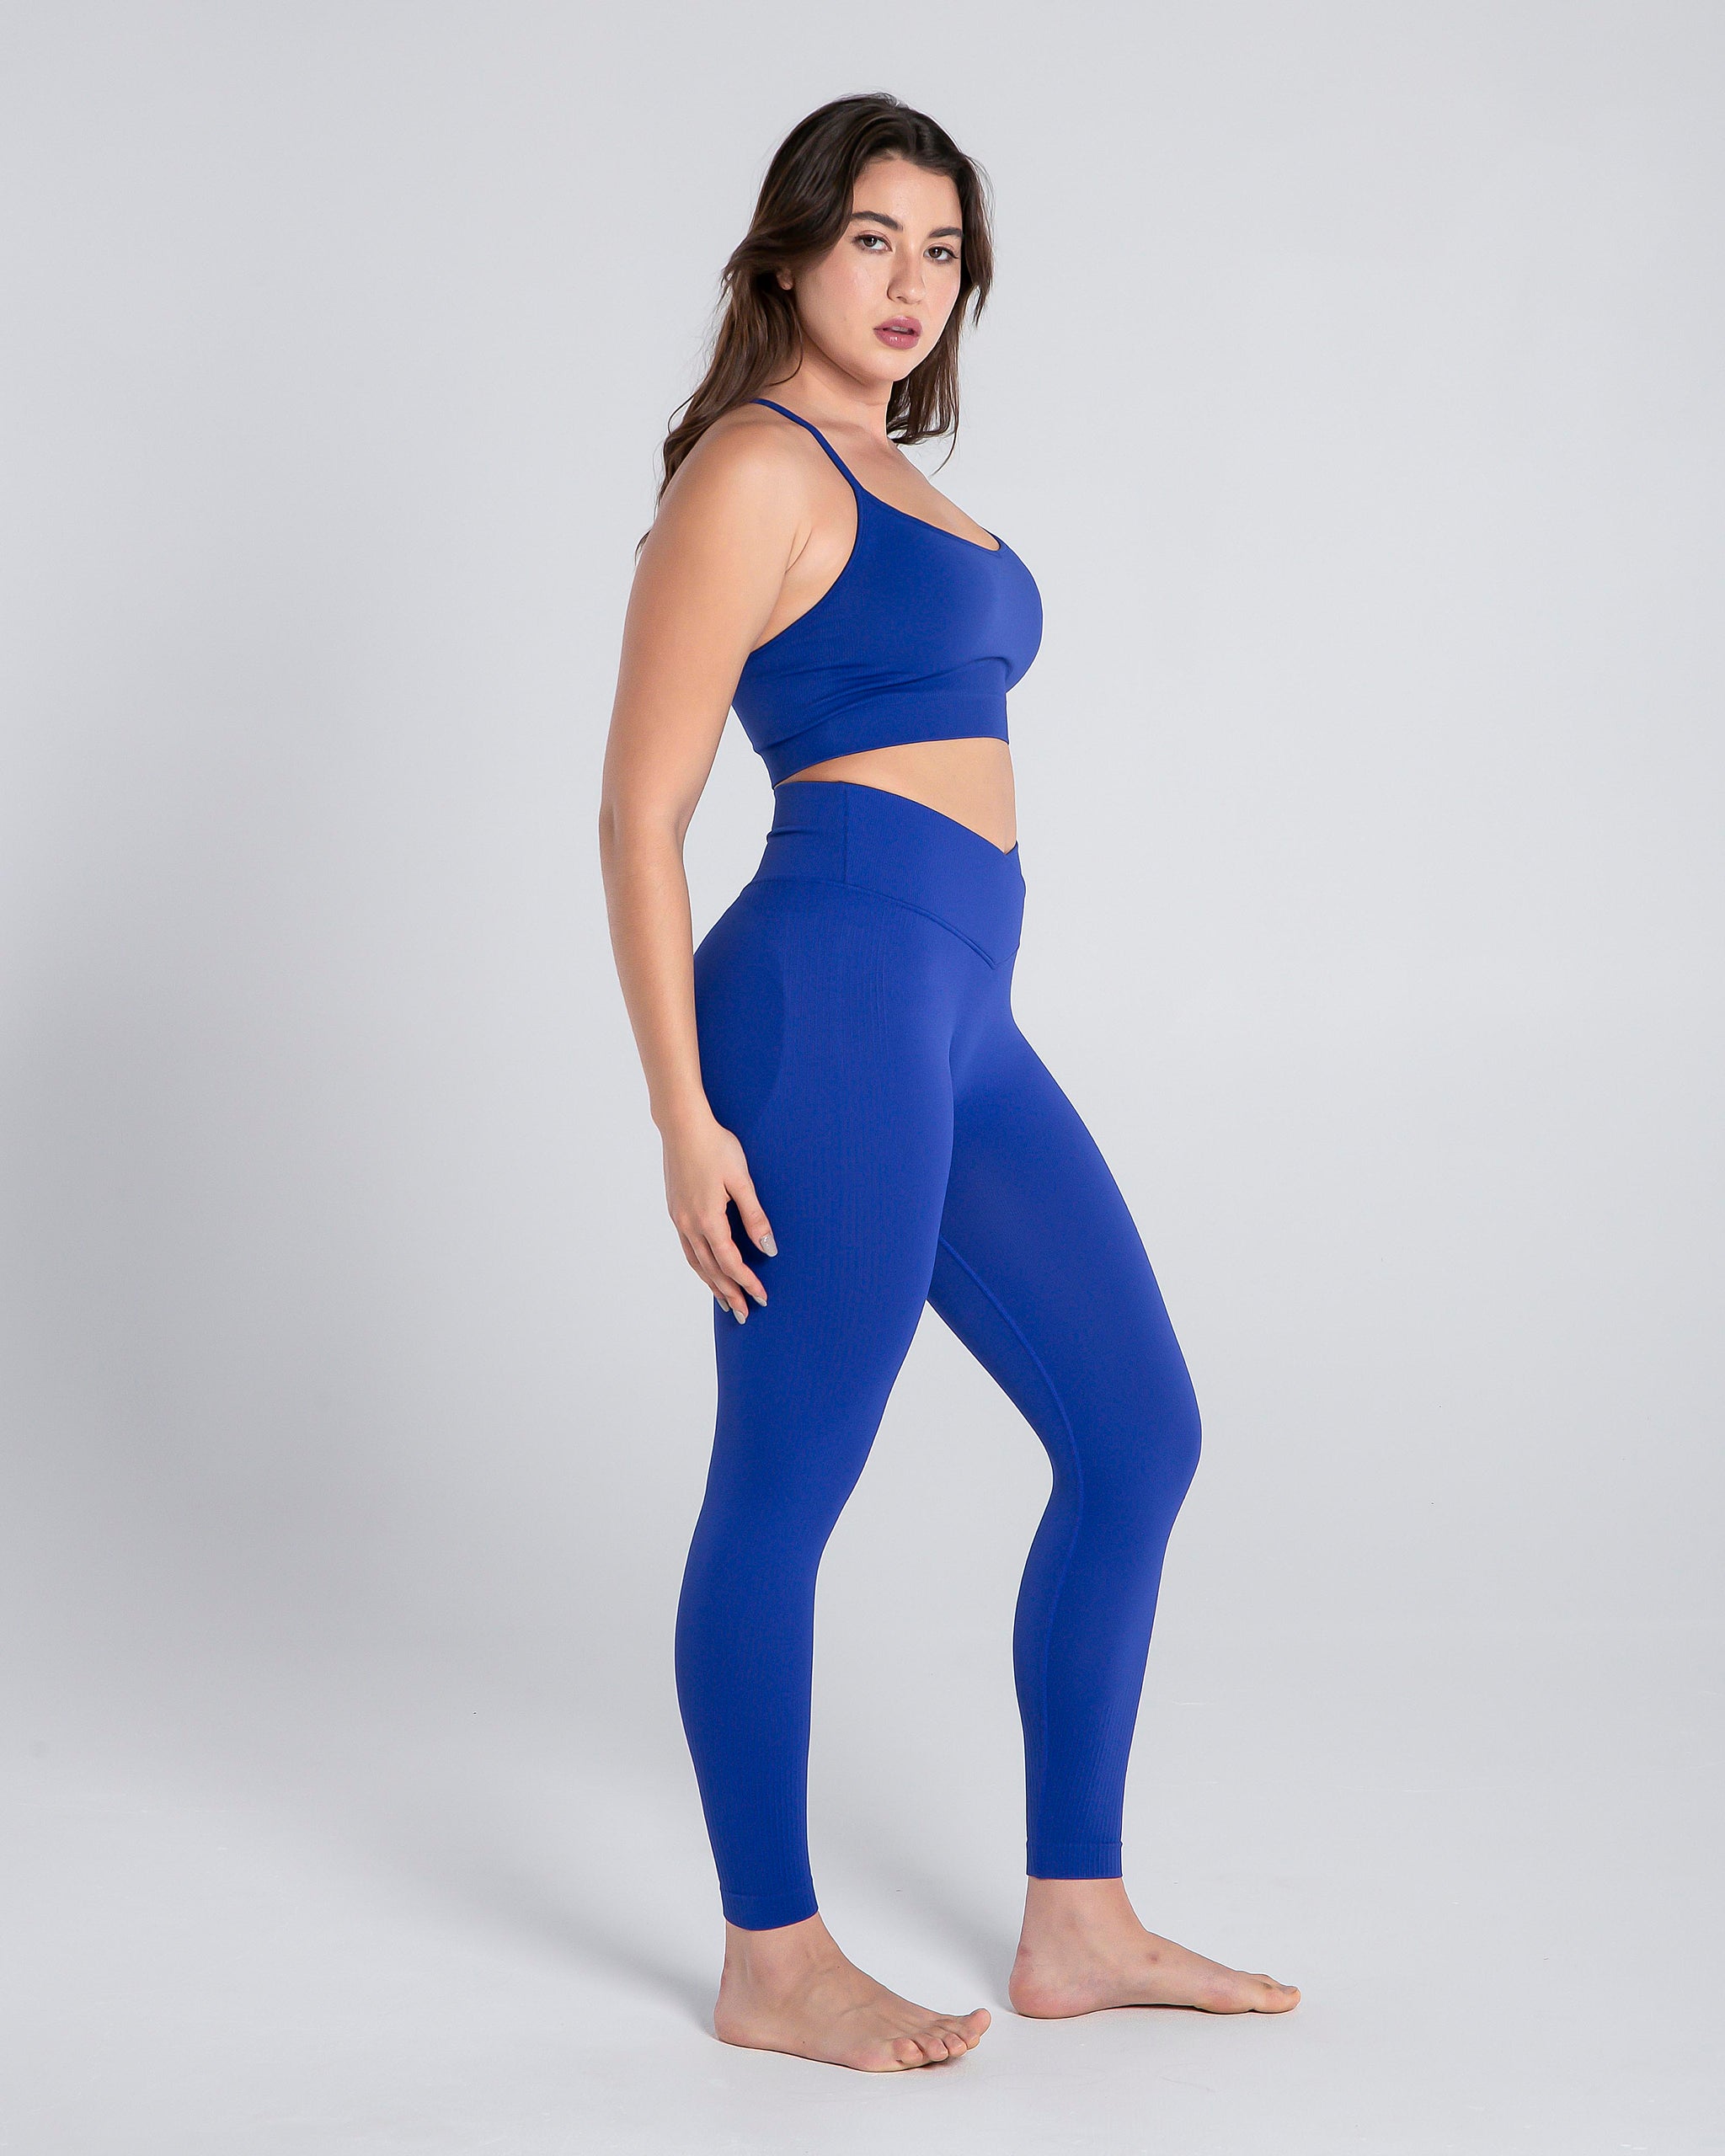 Soft Focus Seamless Leggings by Intimately at Free People in Blue Steel,  Size: XS/S, £44.00